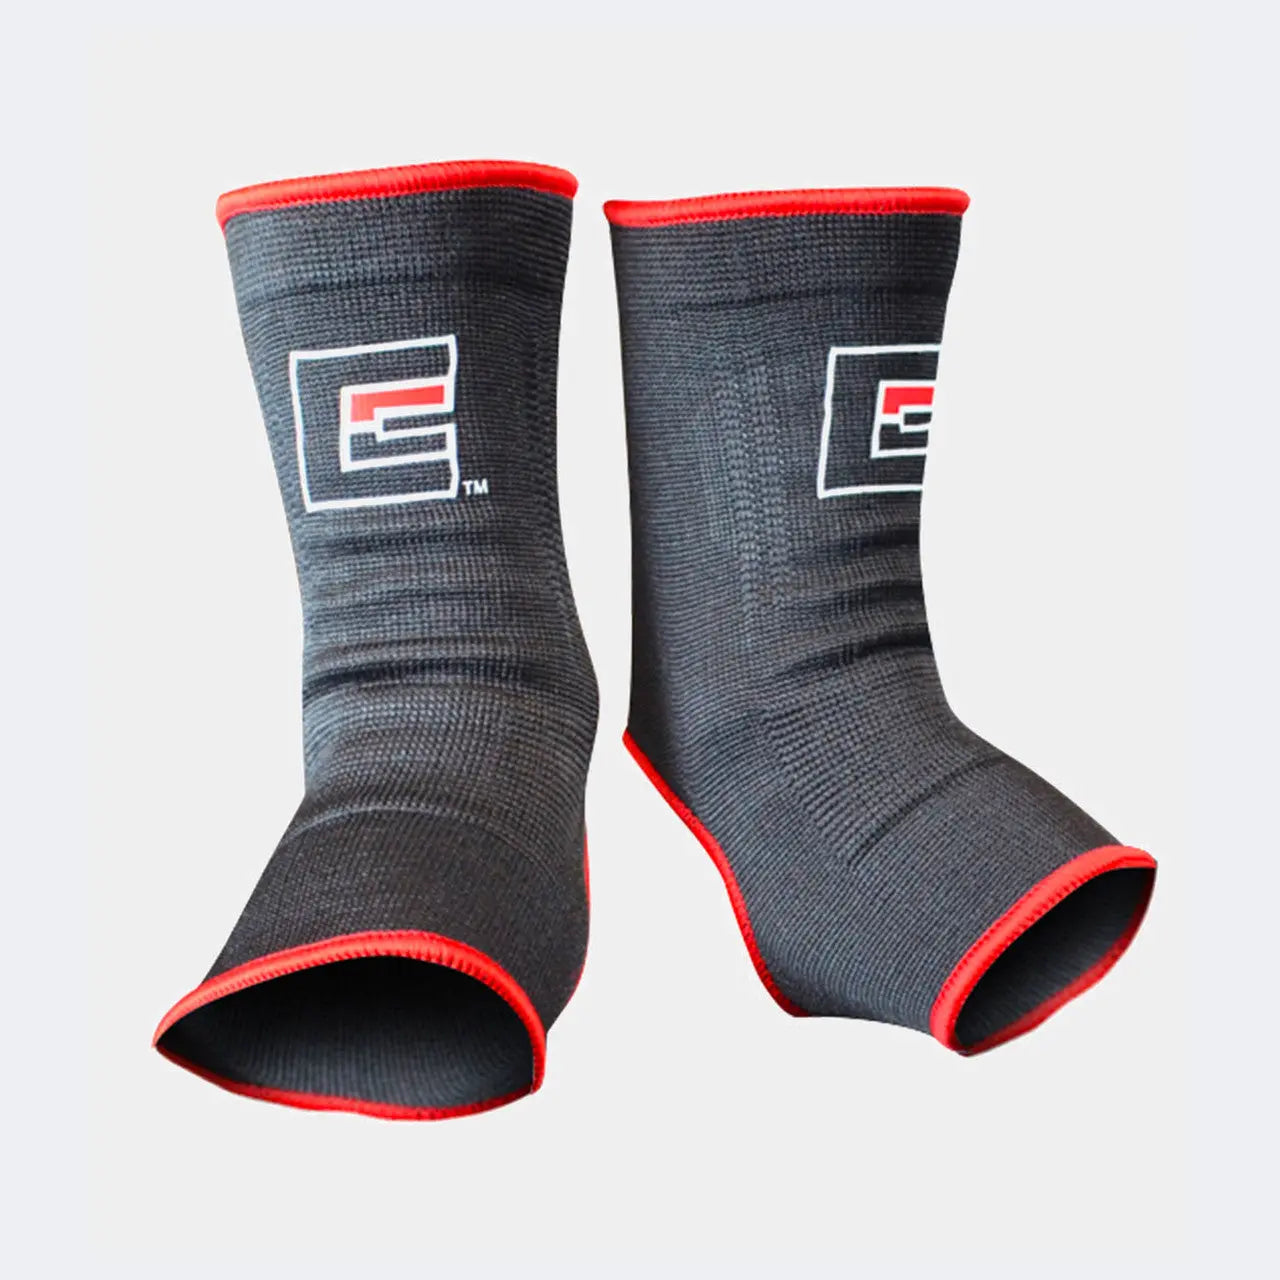 PRO ANKLE SUPPORTS - Prime Combats